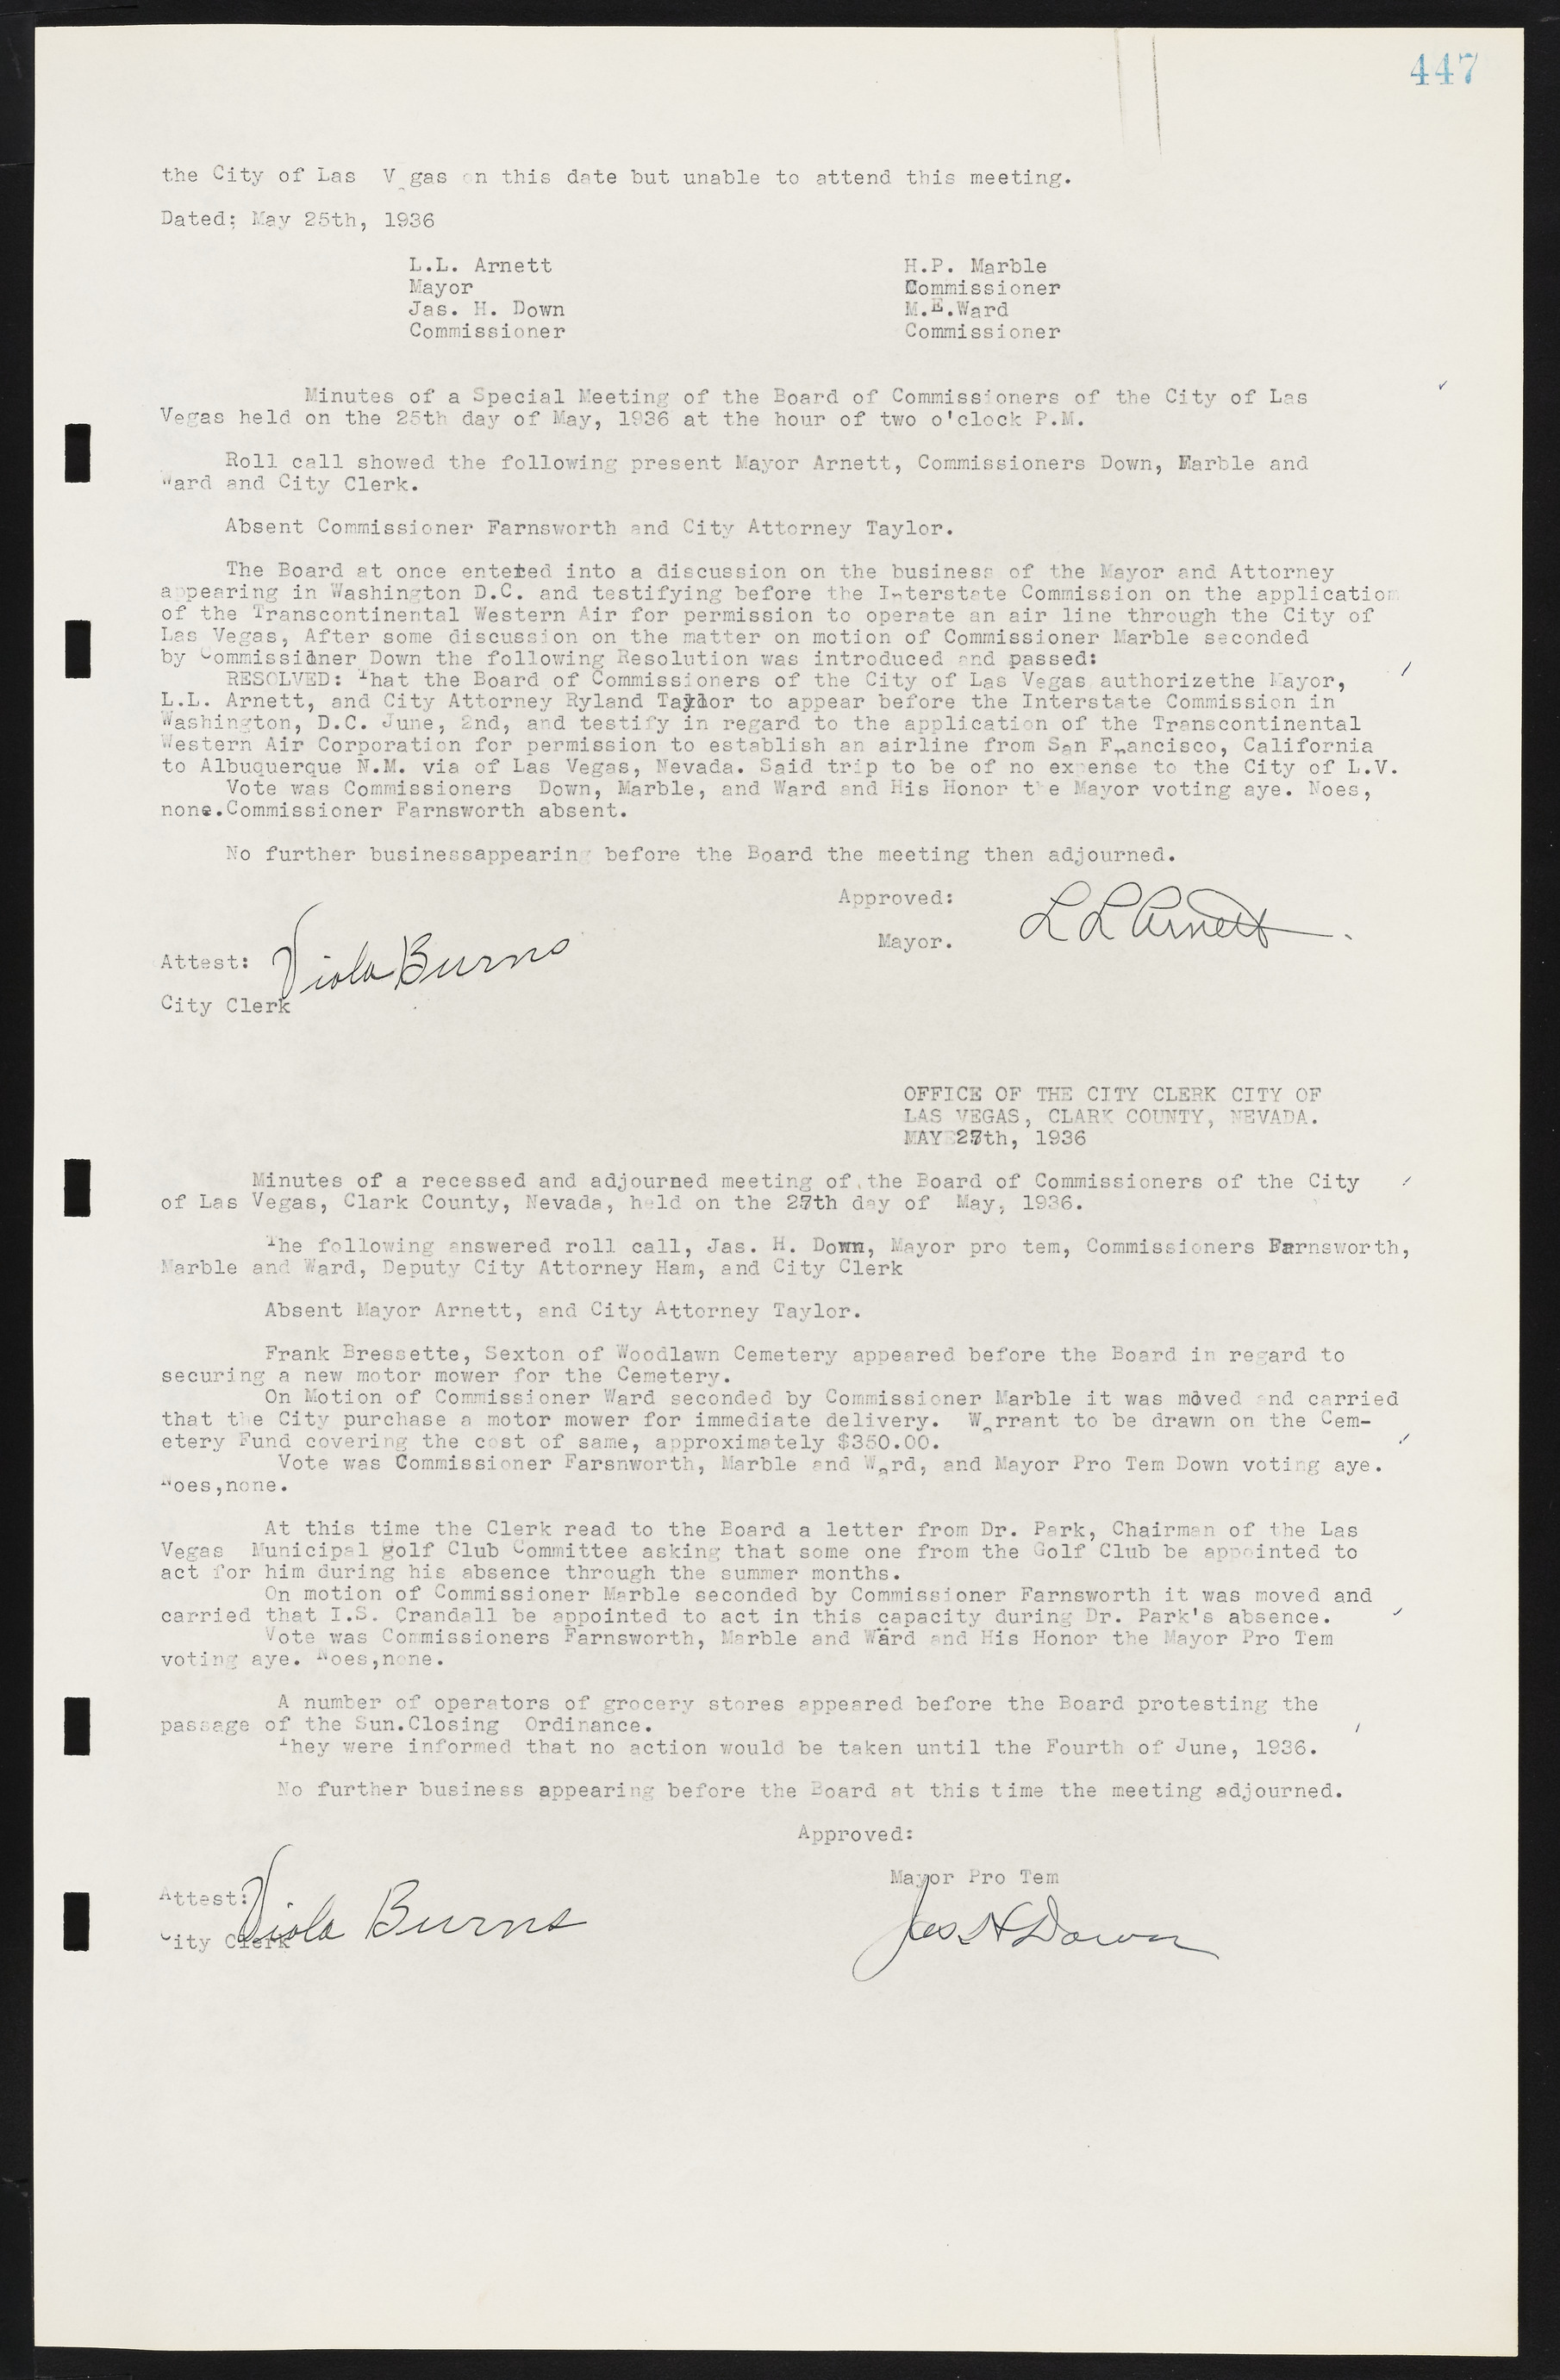 Las Vegas City Commission Minutes, May 14, 1929 to February 11, 1937, lvc000003-454